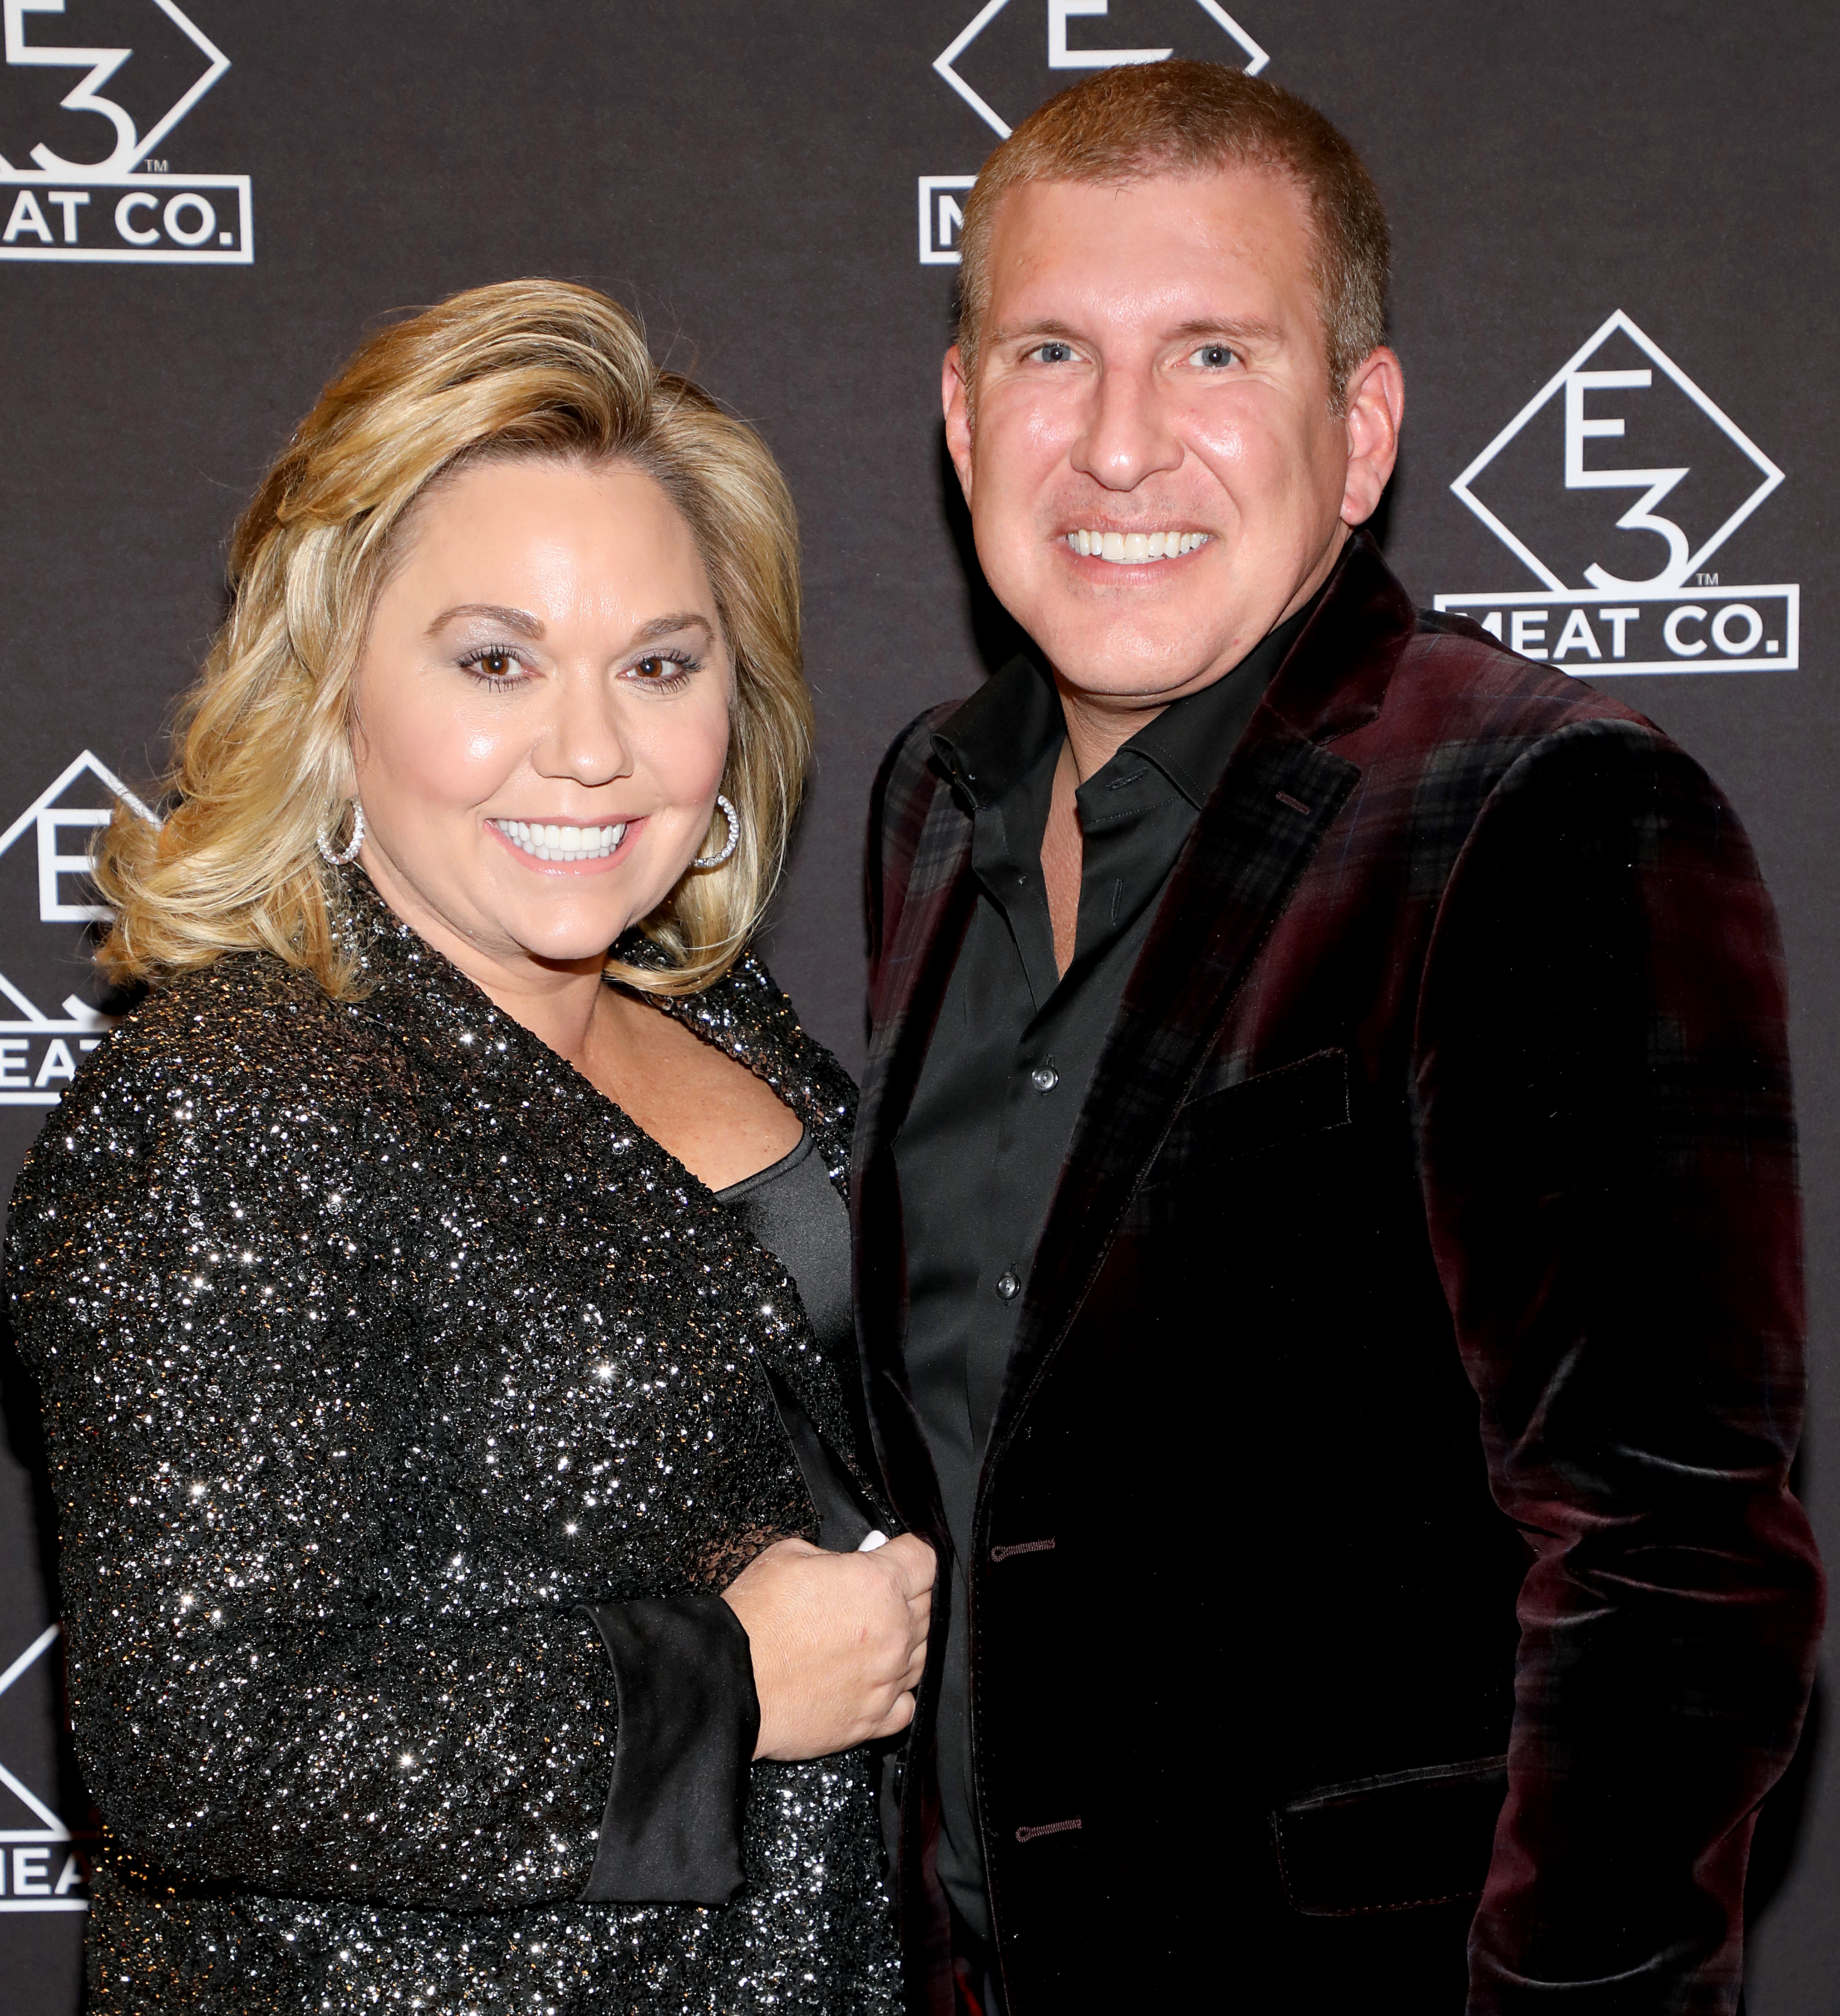 Julie and Todd Chrisley at the E3 Chophouse Nashville Grand Opening Party in 2019 | Source: Getty Images